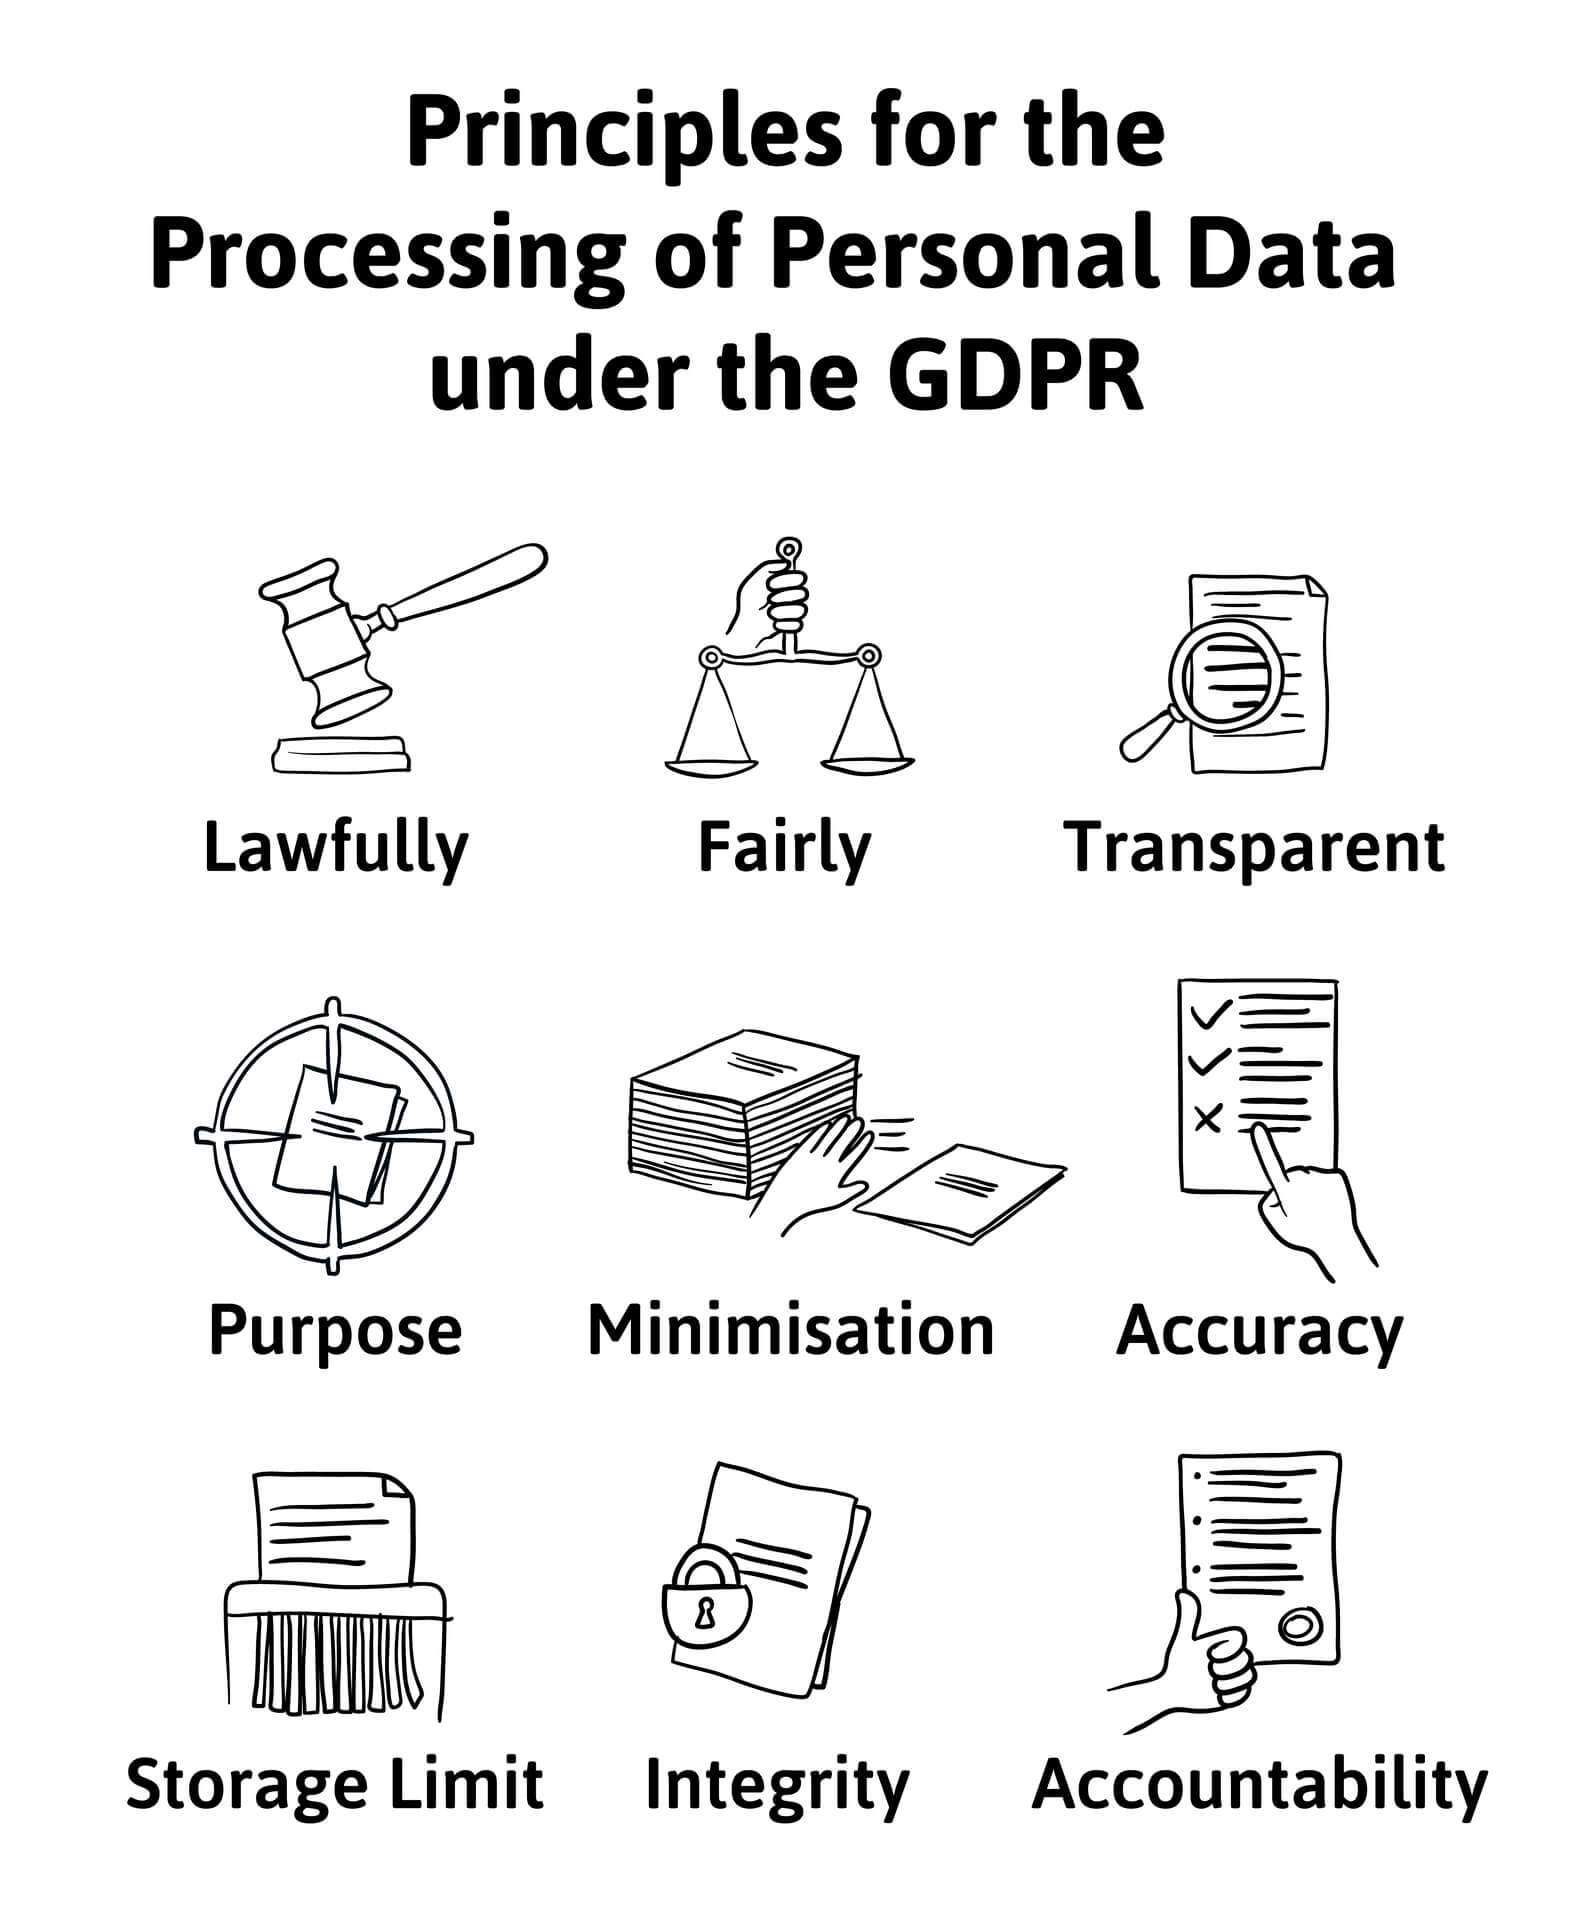 Graphic describing the principles for the processing of personal data under the GDPR